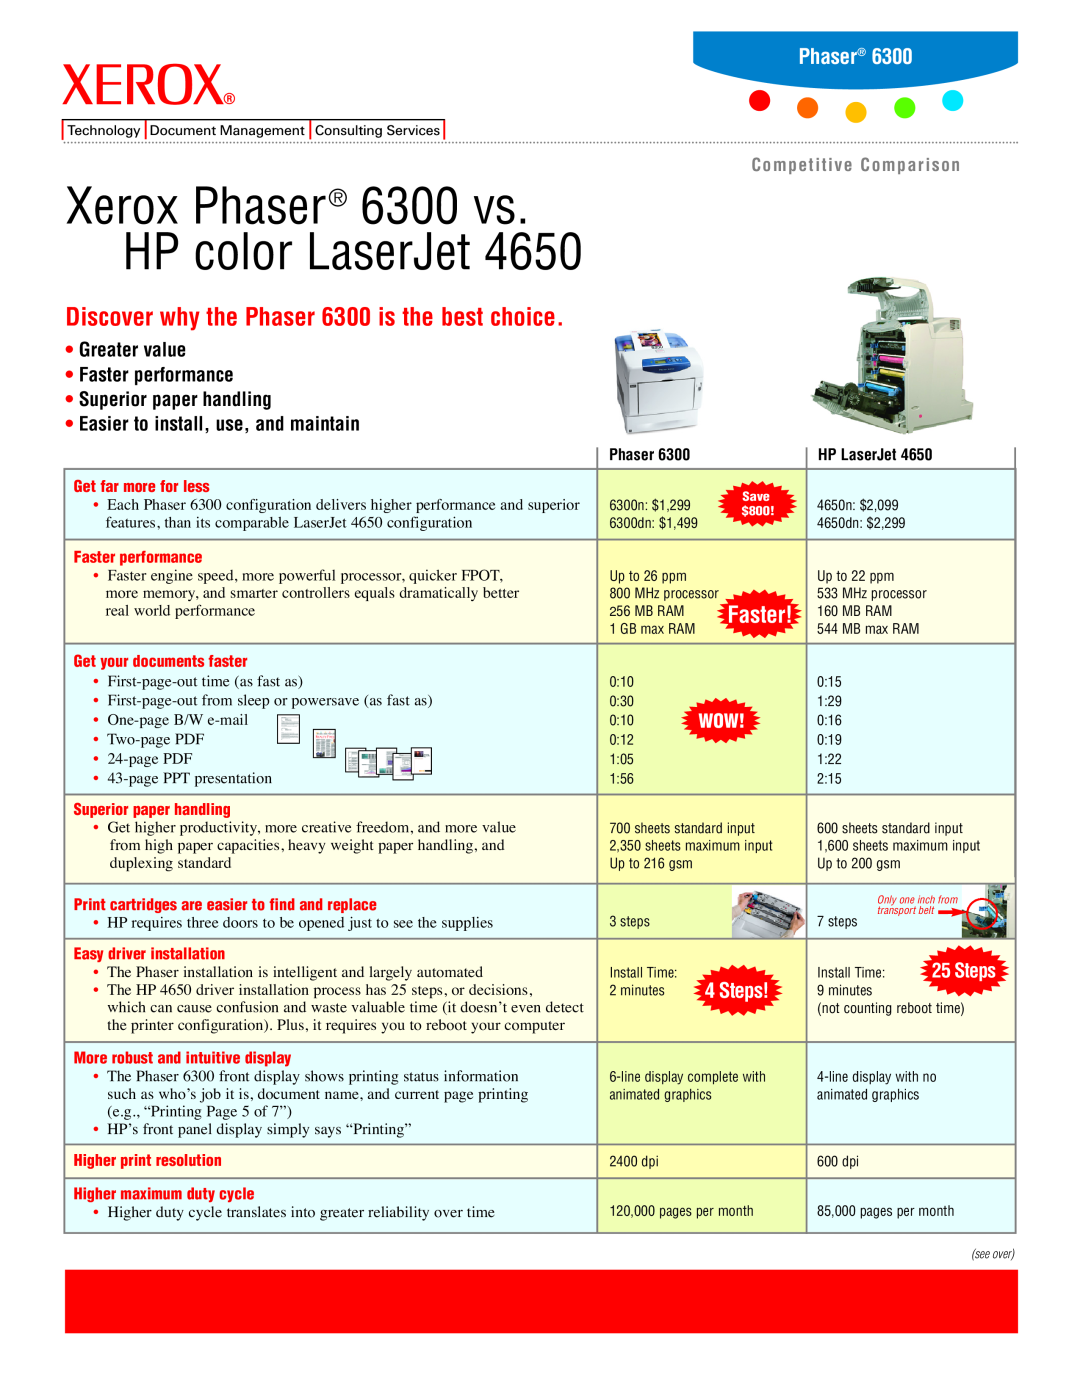 Xerox manual Discover why the Phaser 6300 is the best choice, Faster, Steps, Competitive Comparison, HP LaserJet 